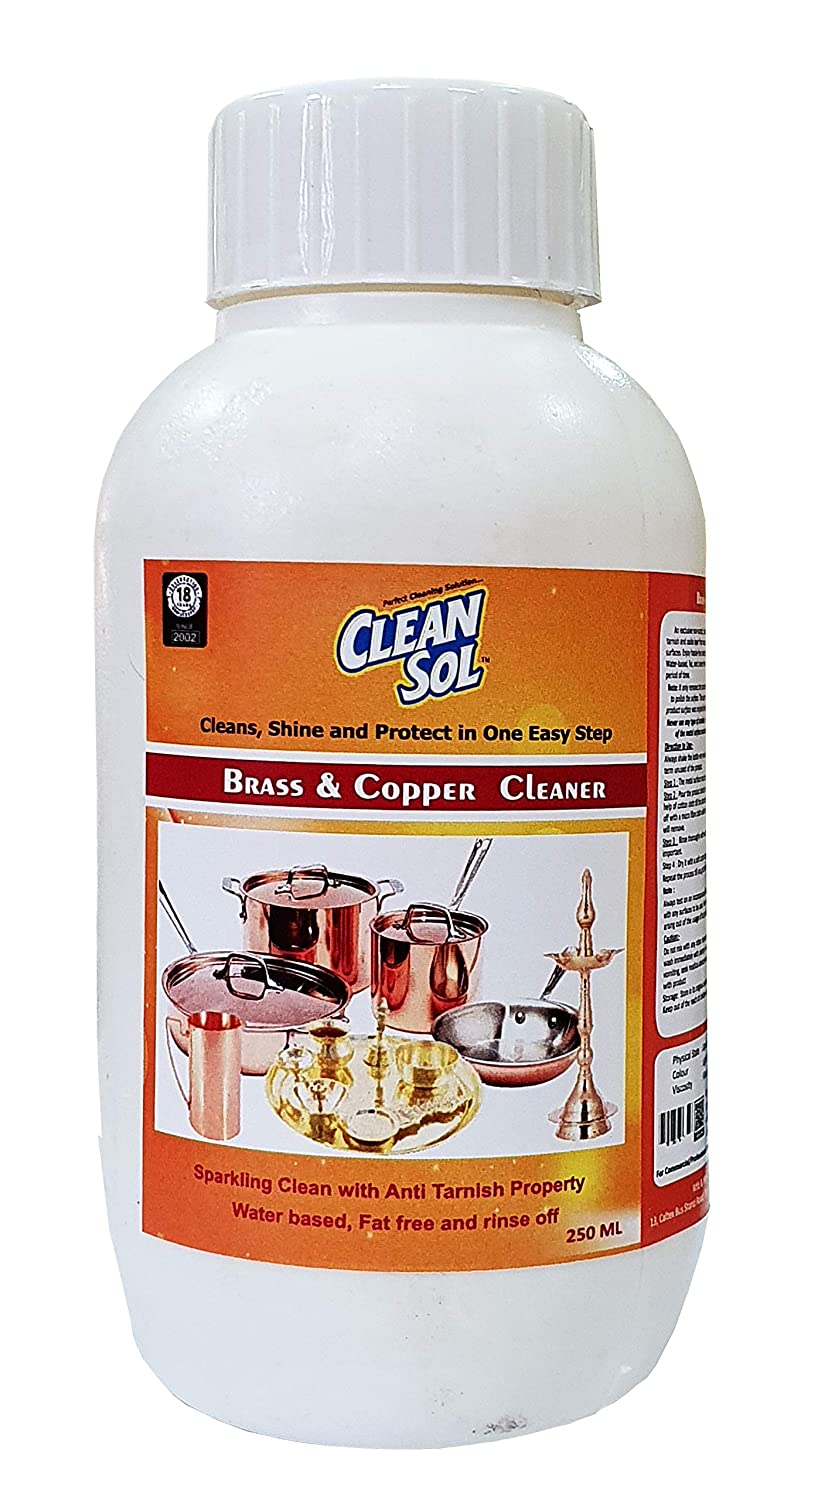 Cleansol Copper, Brass and Steel Cleaning & Shine Liquid